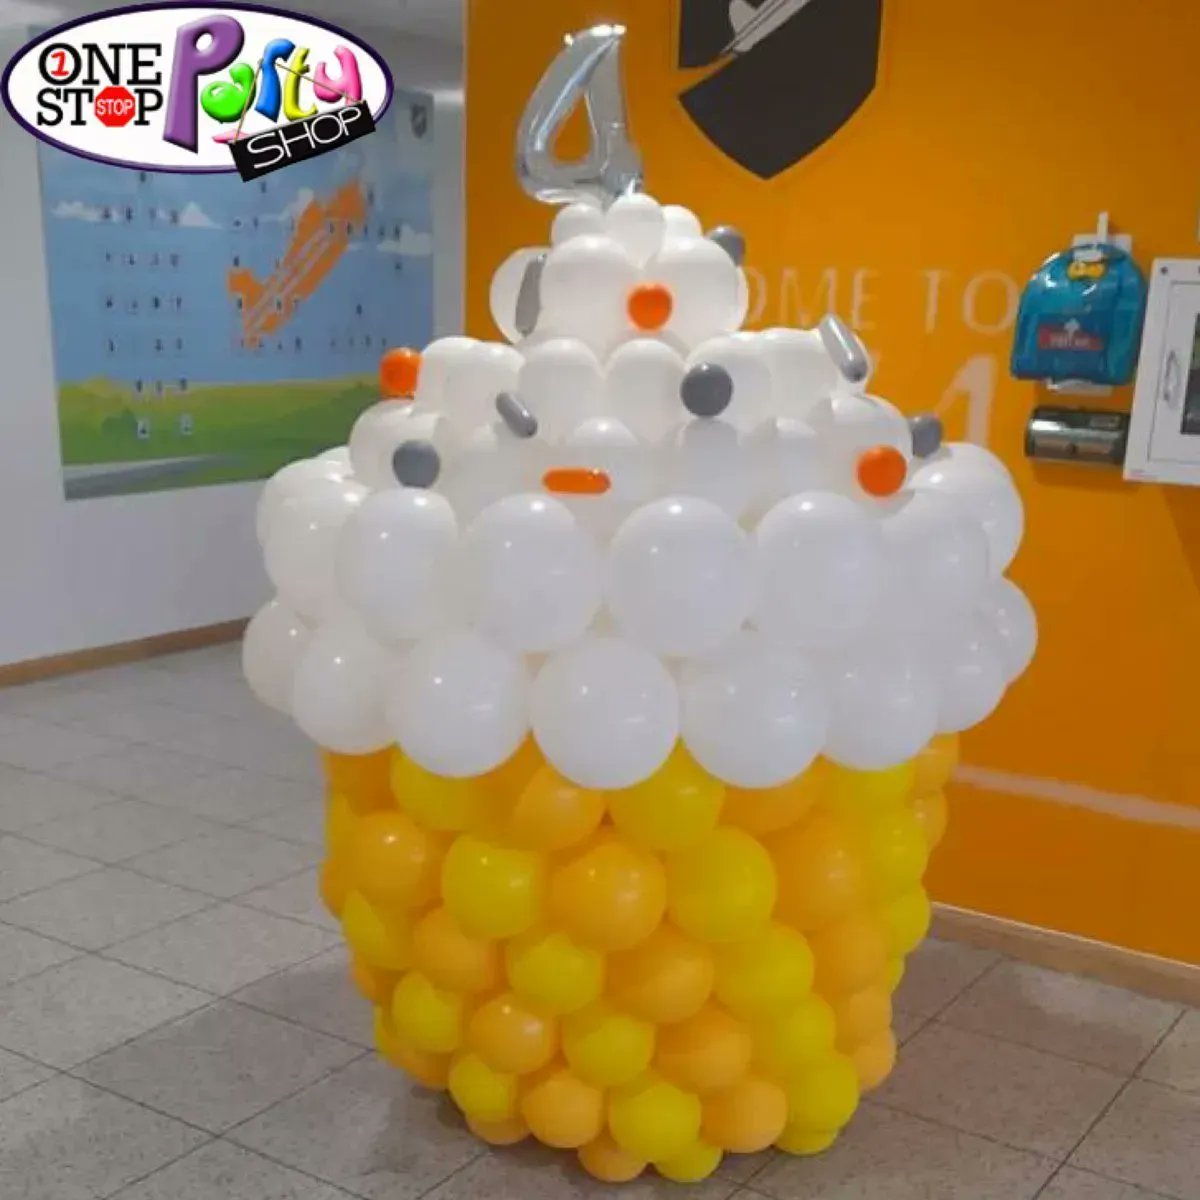 How sweet does this look? 😂🎈🍾

#partyideas #balloonsdecoration #balloonideas #balloonsarefun #loveleam #leamington #warwick #coventry #stratford #rugby